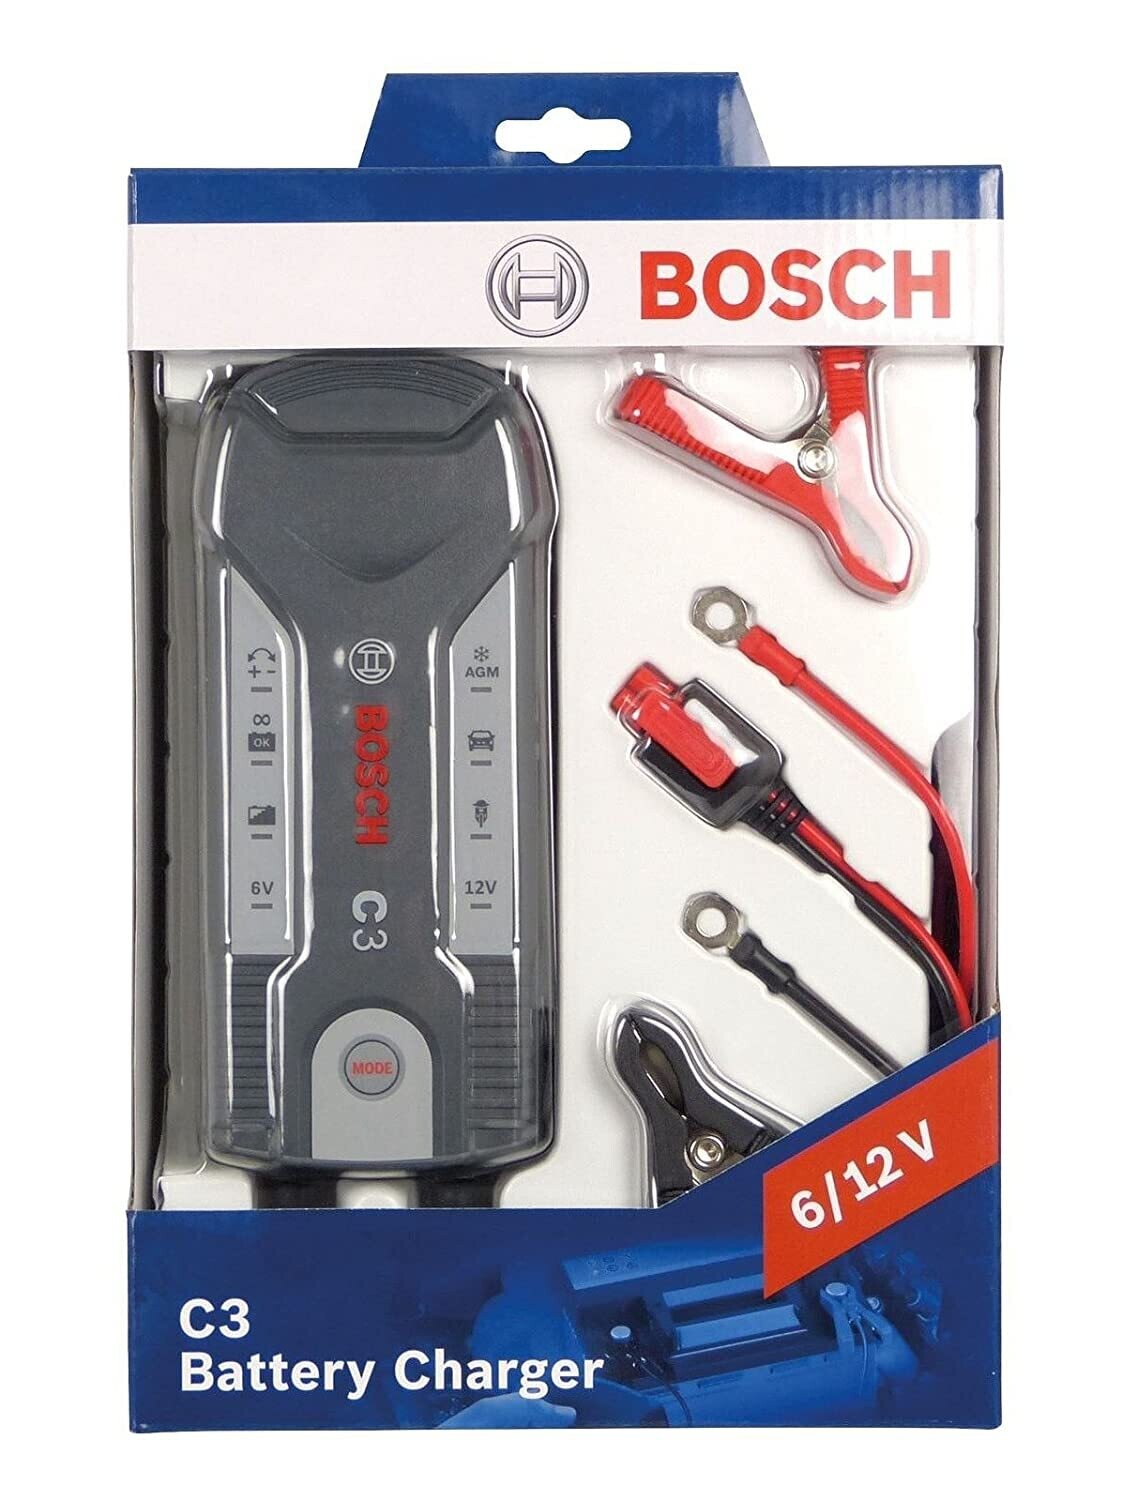 BOSCH C3 6V/12V Battery Charger for Two Wheelers and Passenger Cars